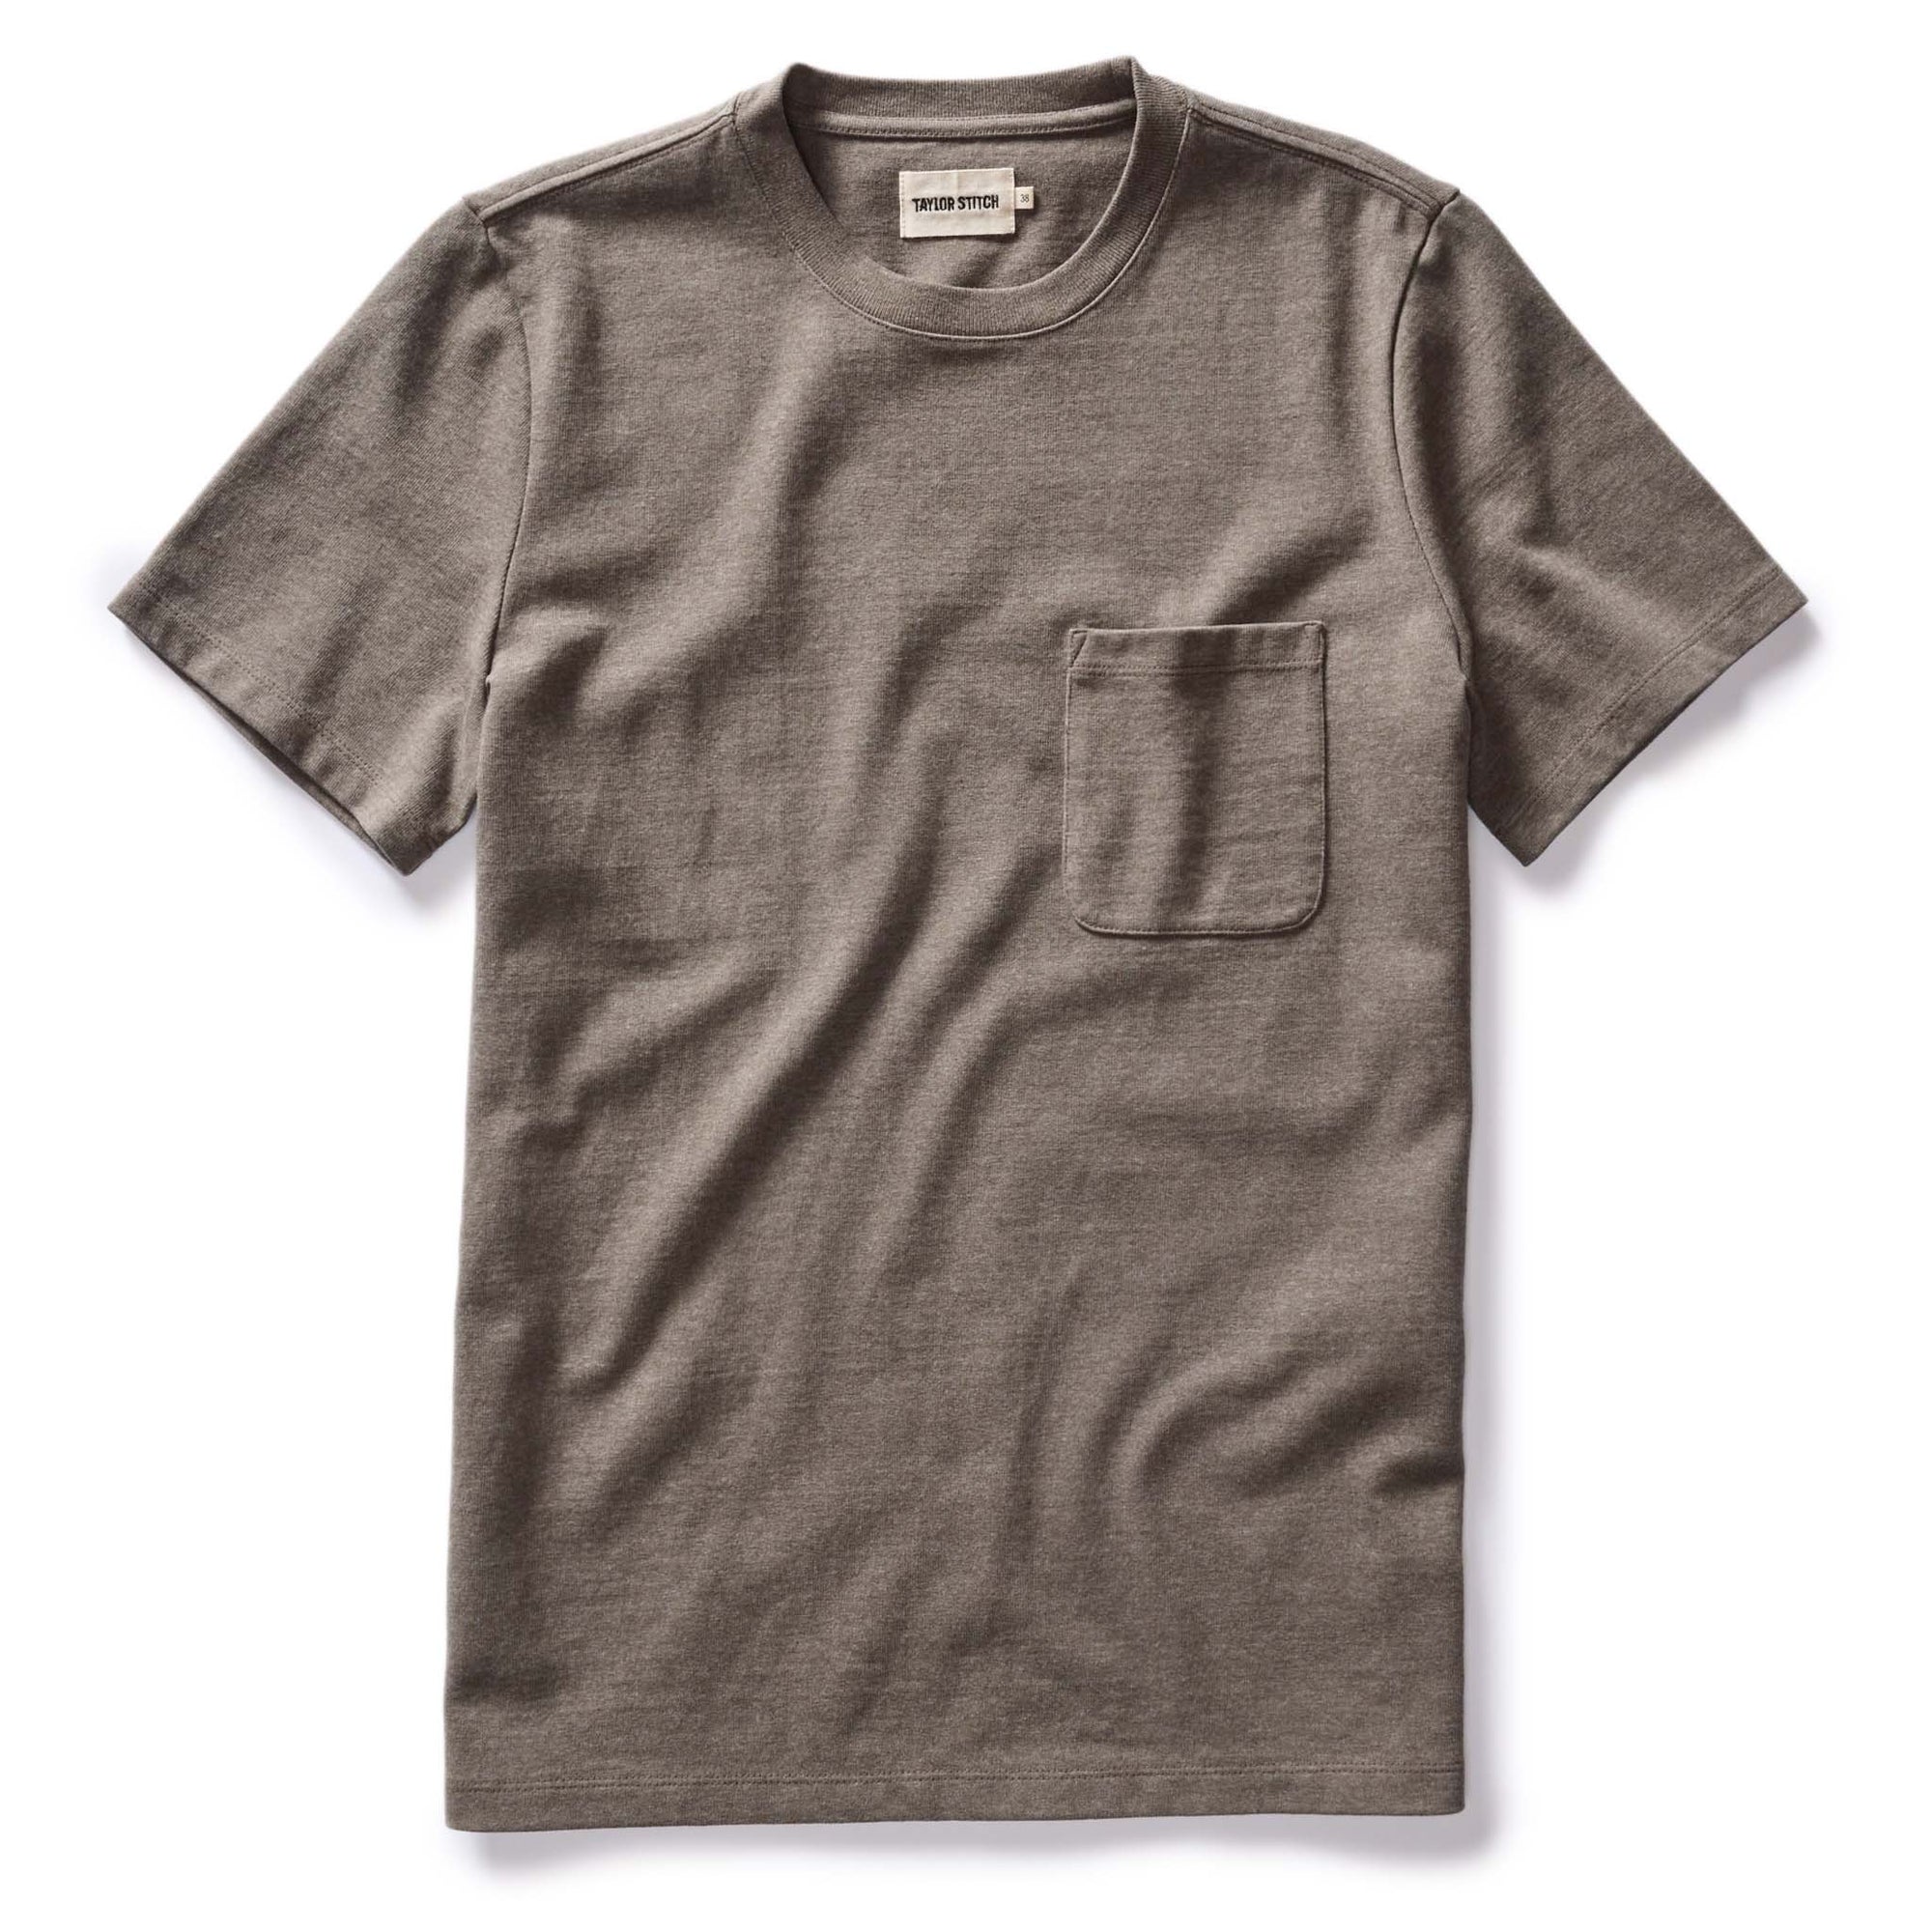 Taylor Stitch - Heavy Bag Tee in Smoked Olive